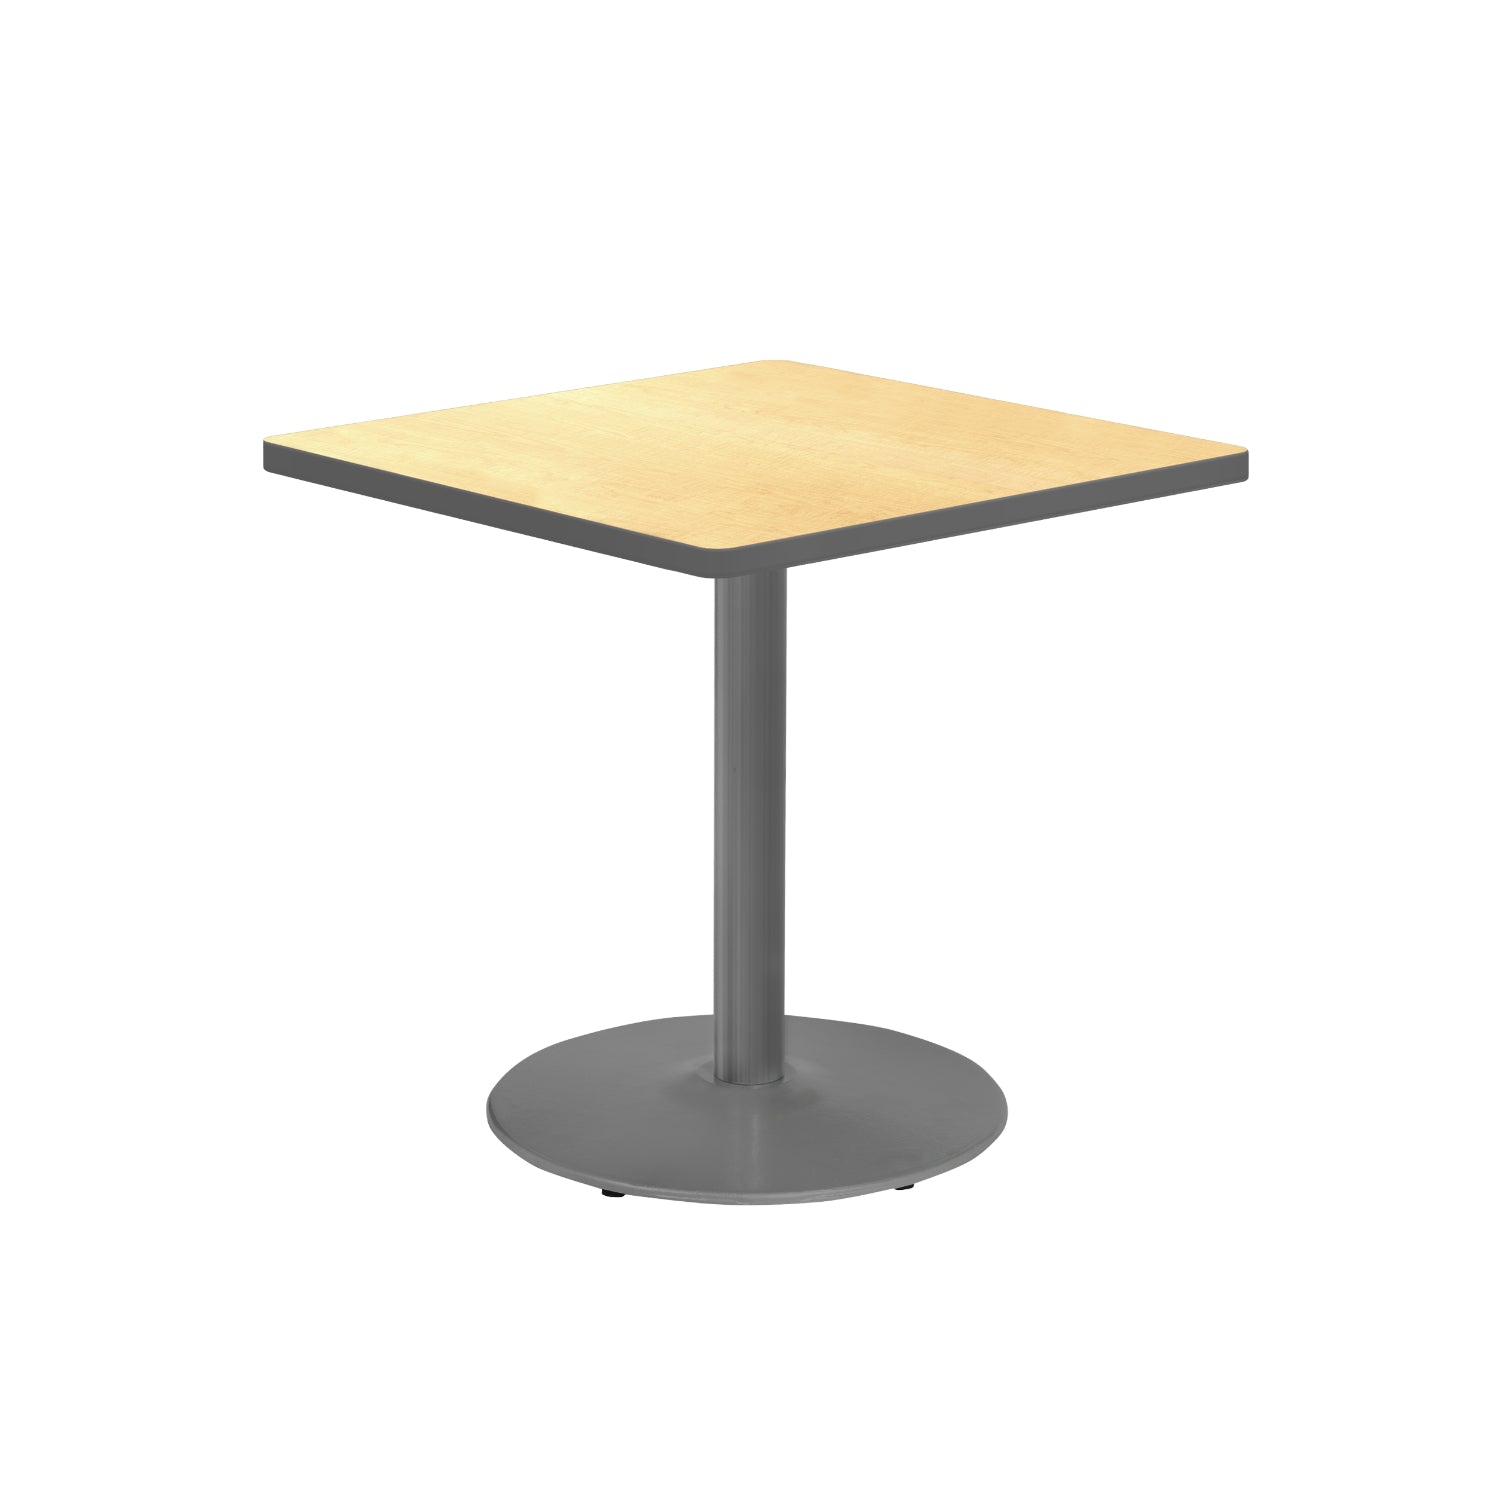 30" Square Sitting Height Café Table